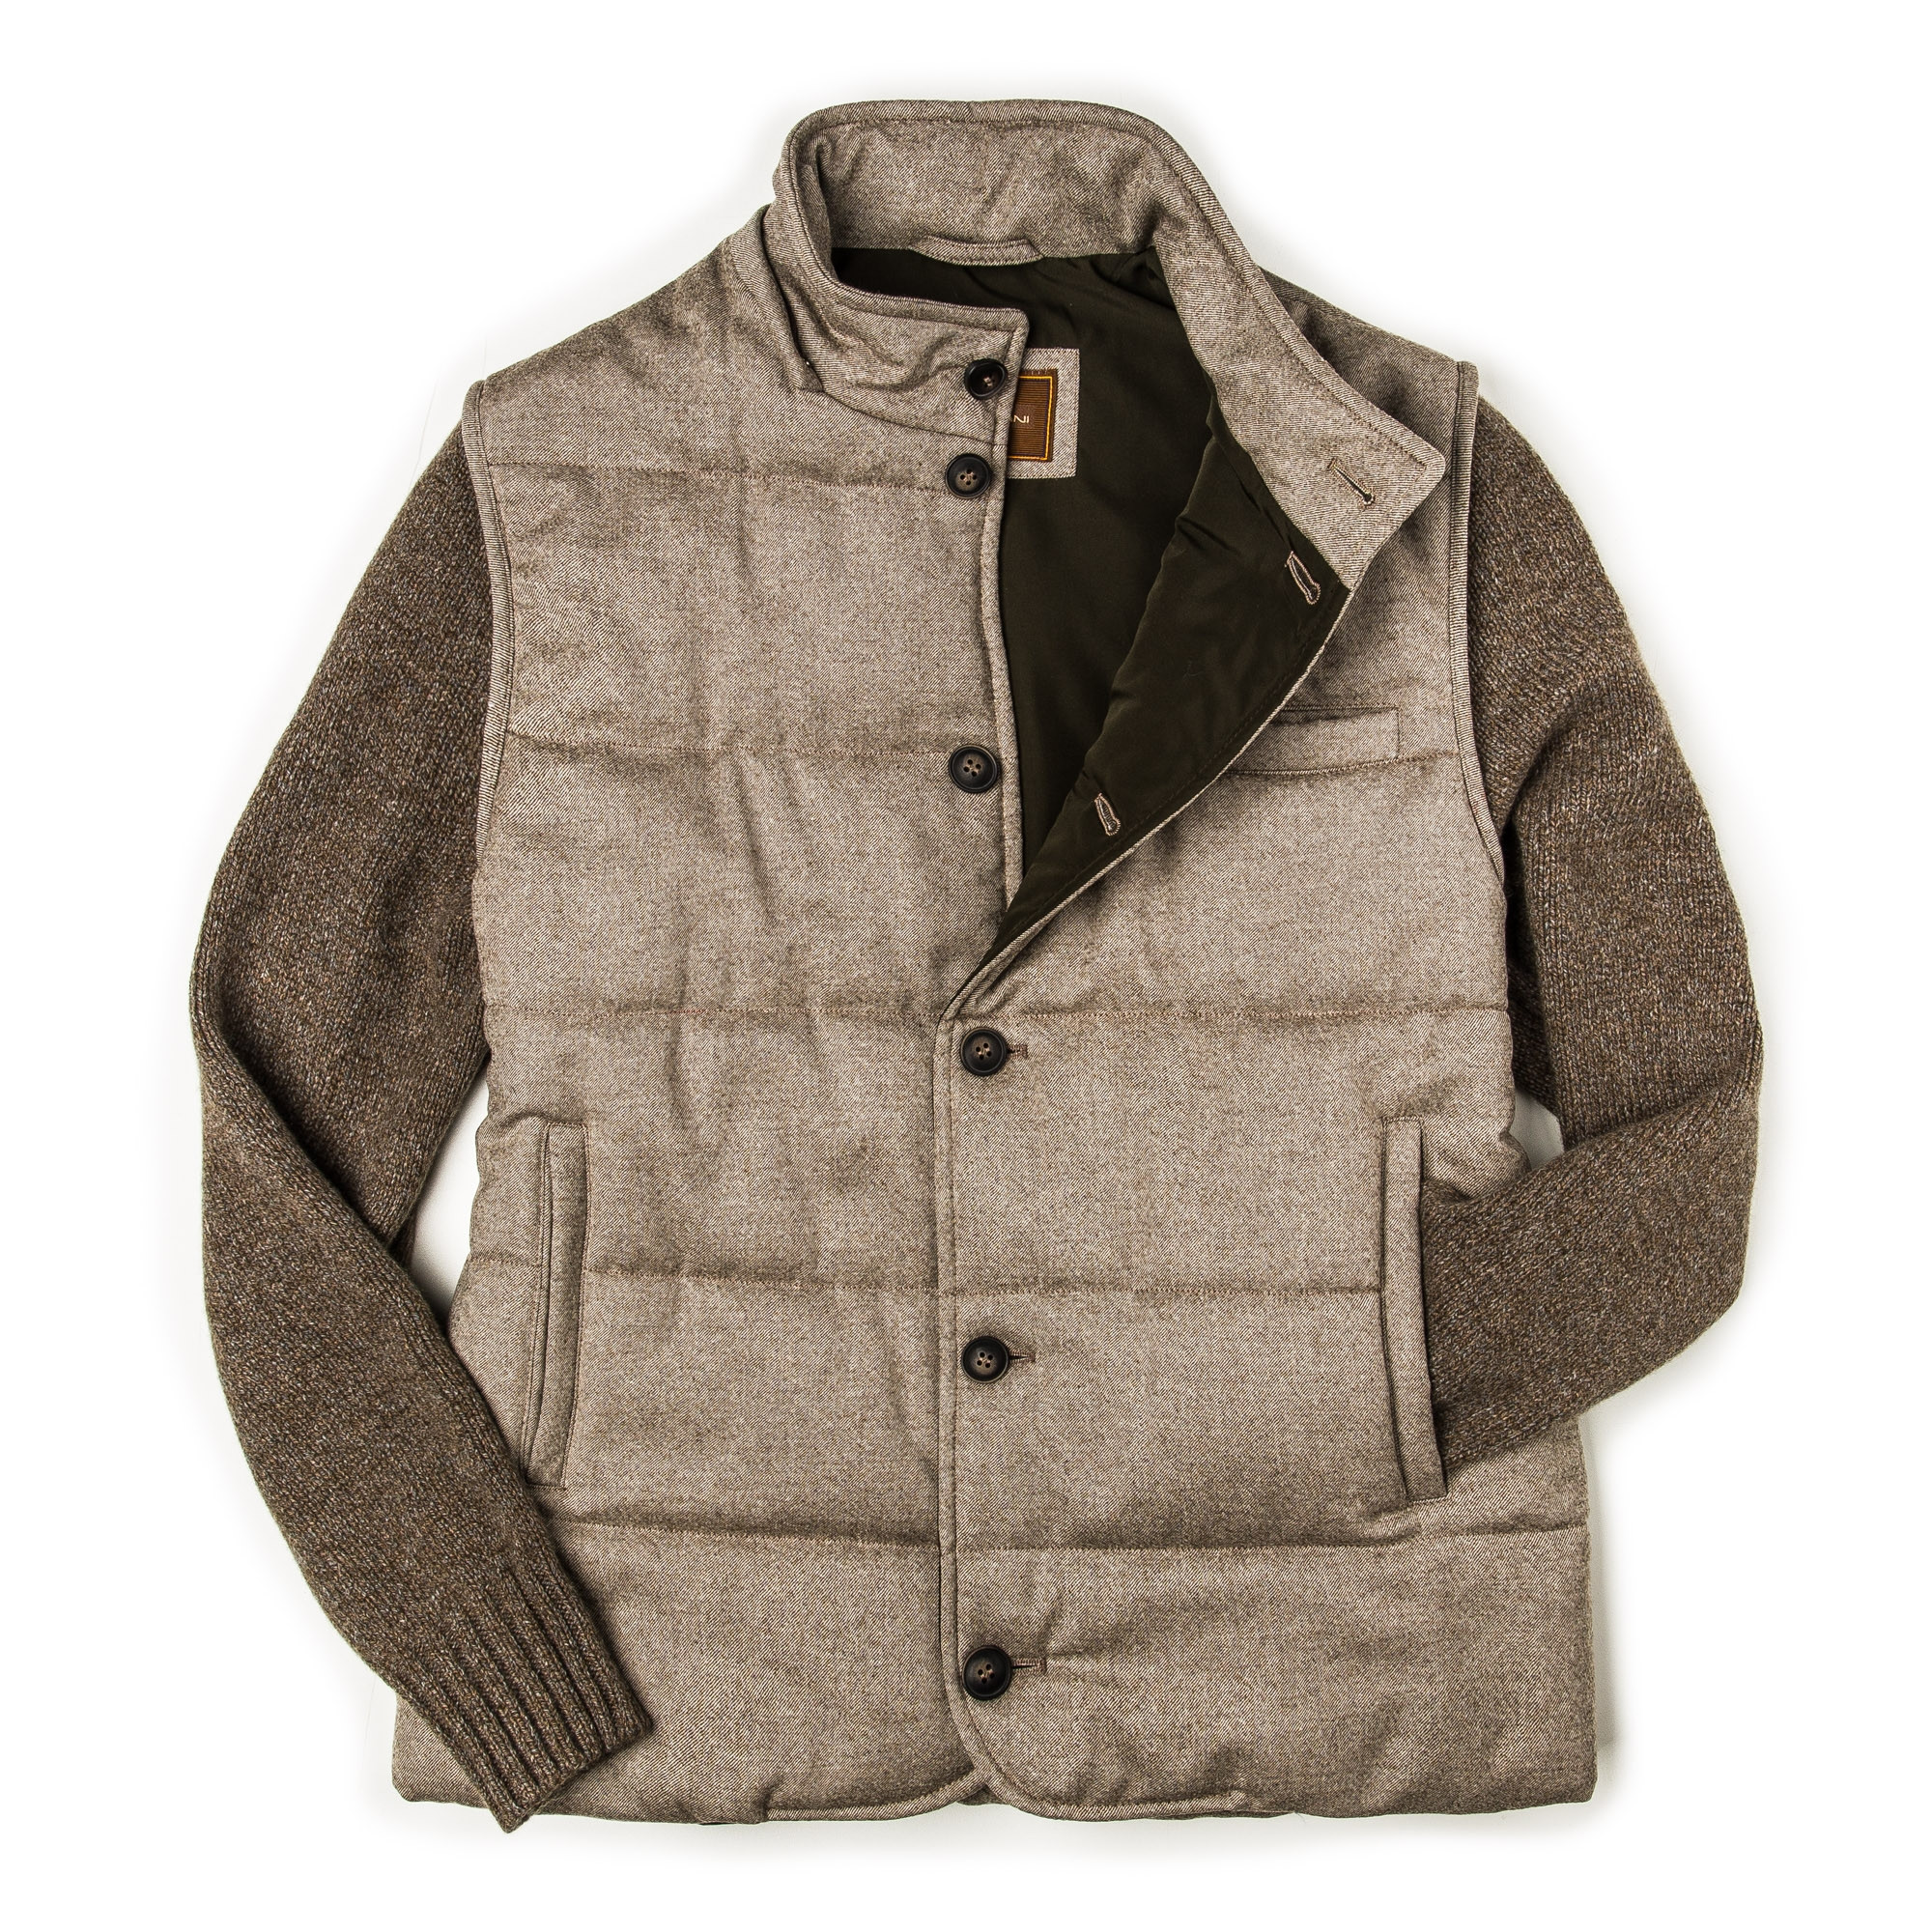 Doriani - Men's Quilted Coat With Knit Sleeves